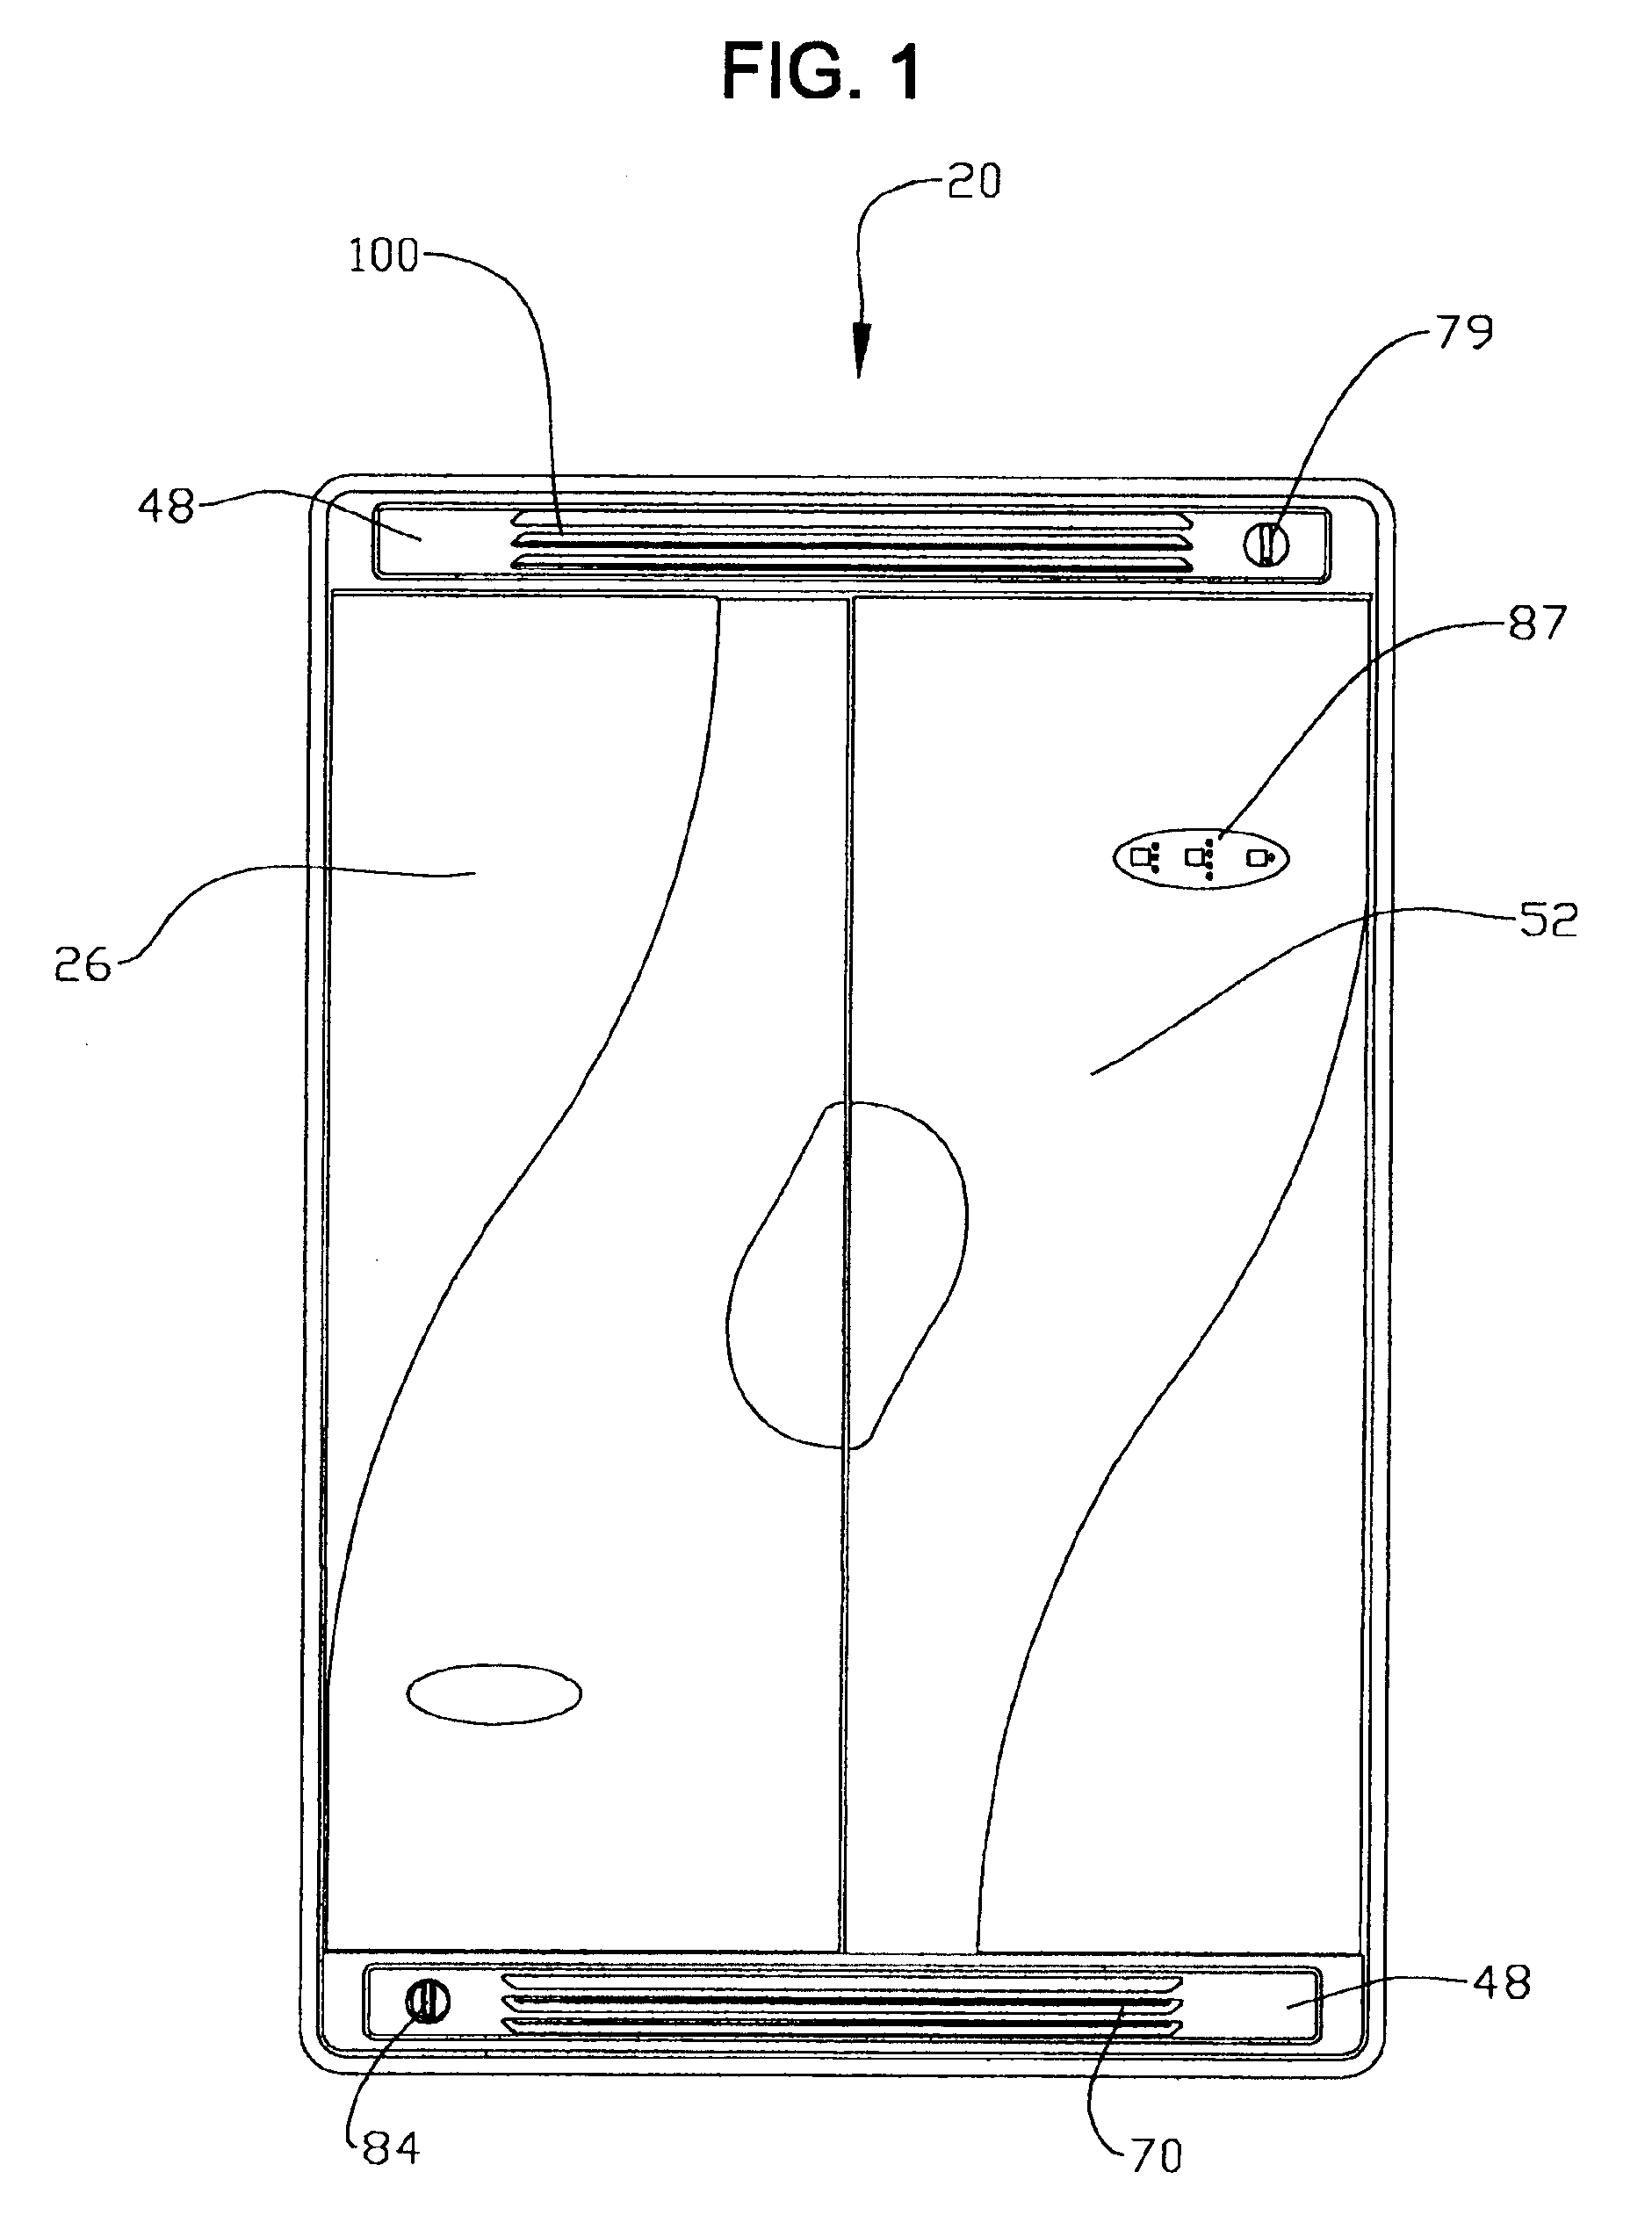 Clothes drying apparatus and method of drying clothes